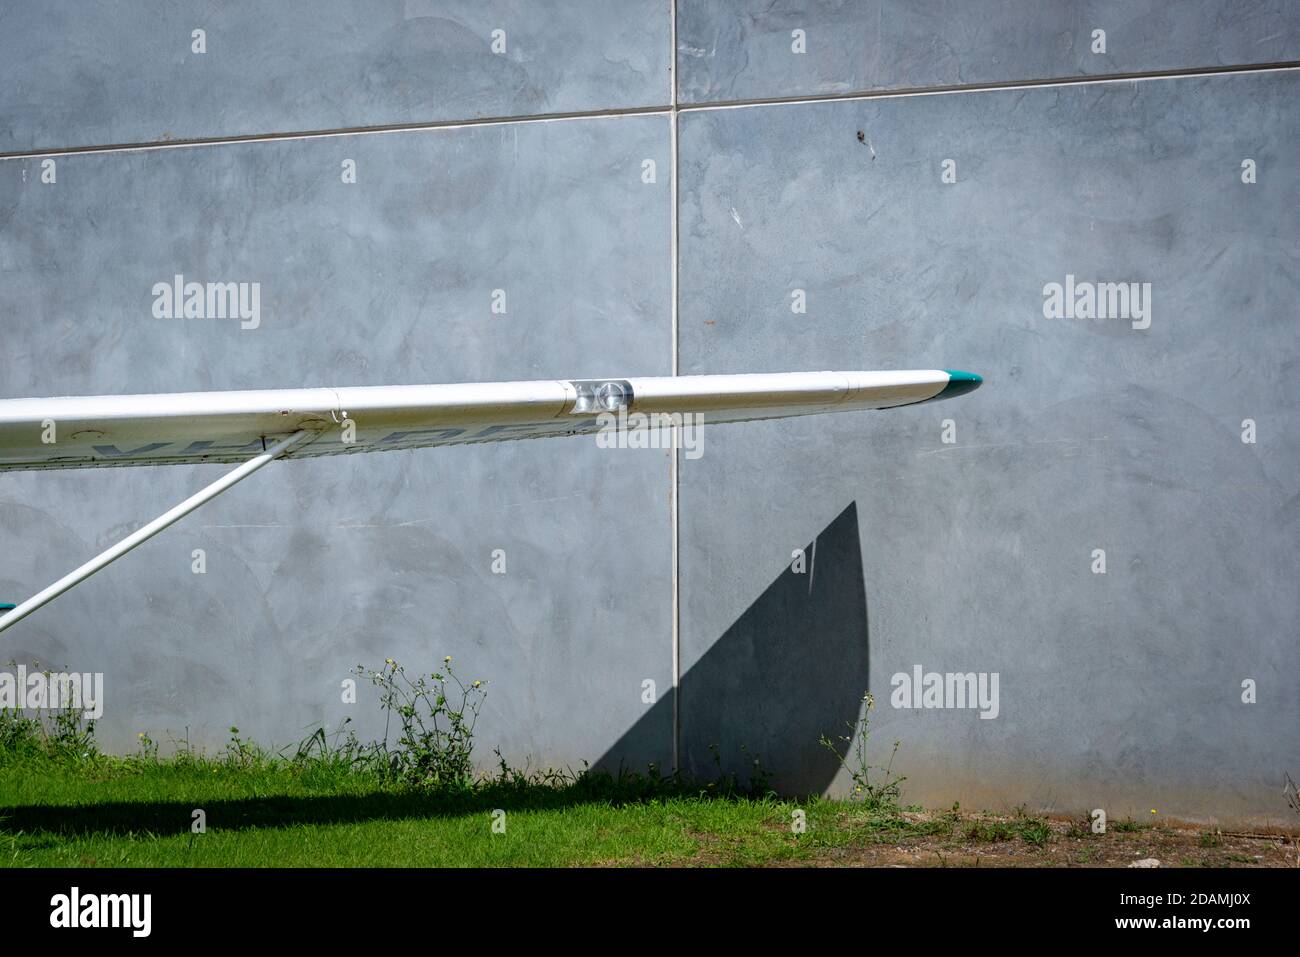 Wing of an old plane, throwing a shadow against a concrete wall and green lawn Stock Photo